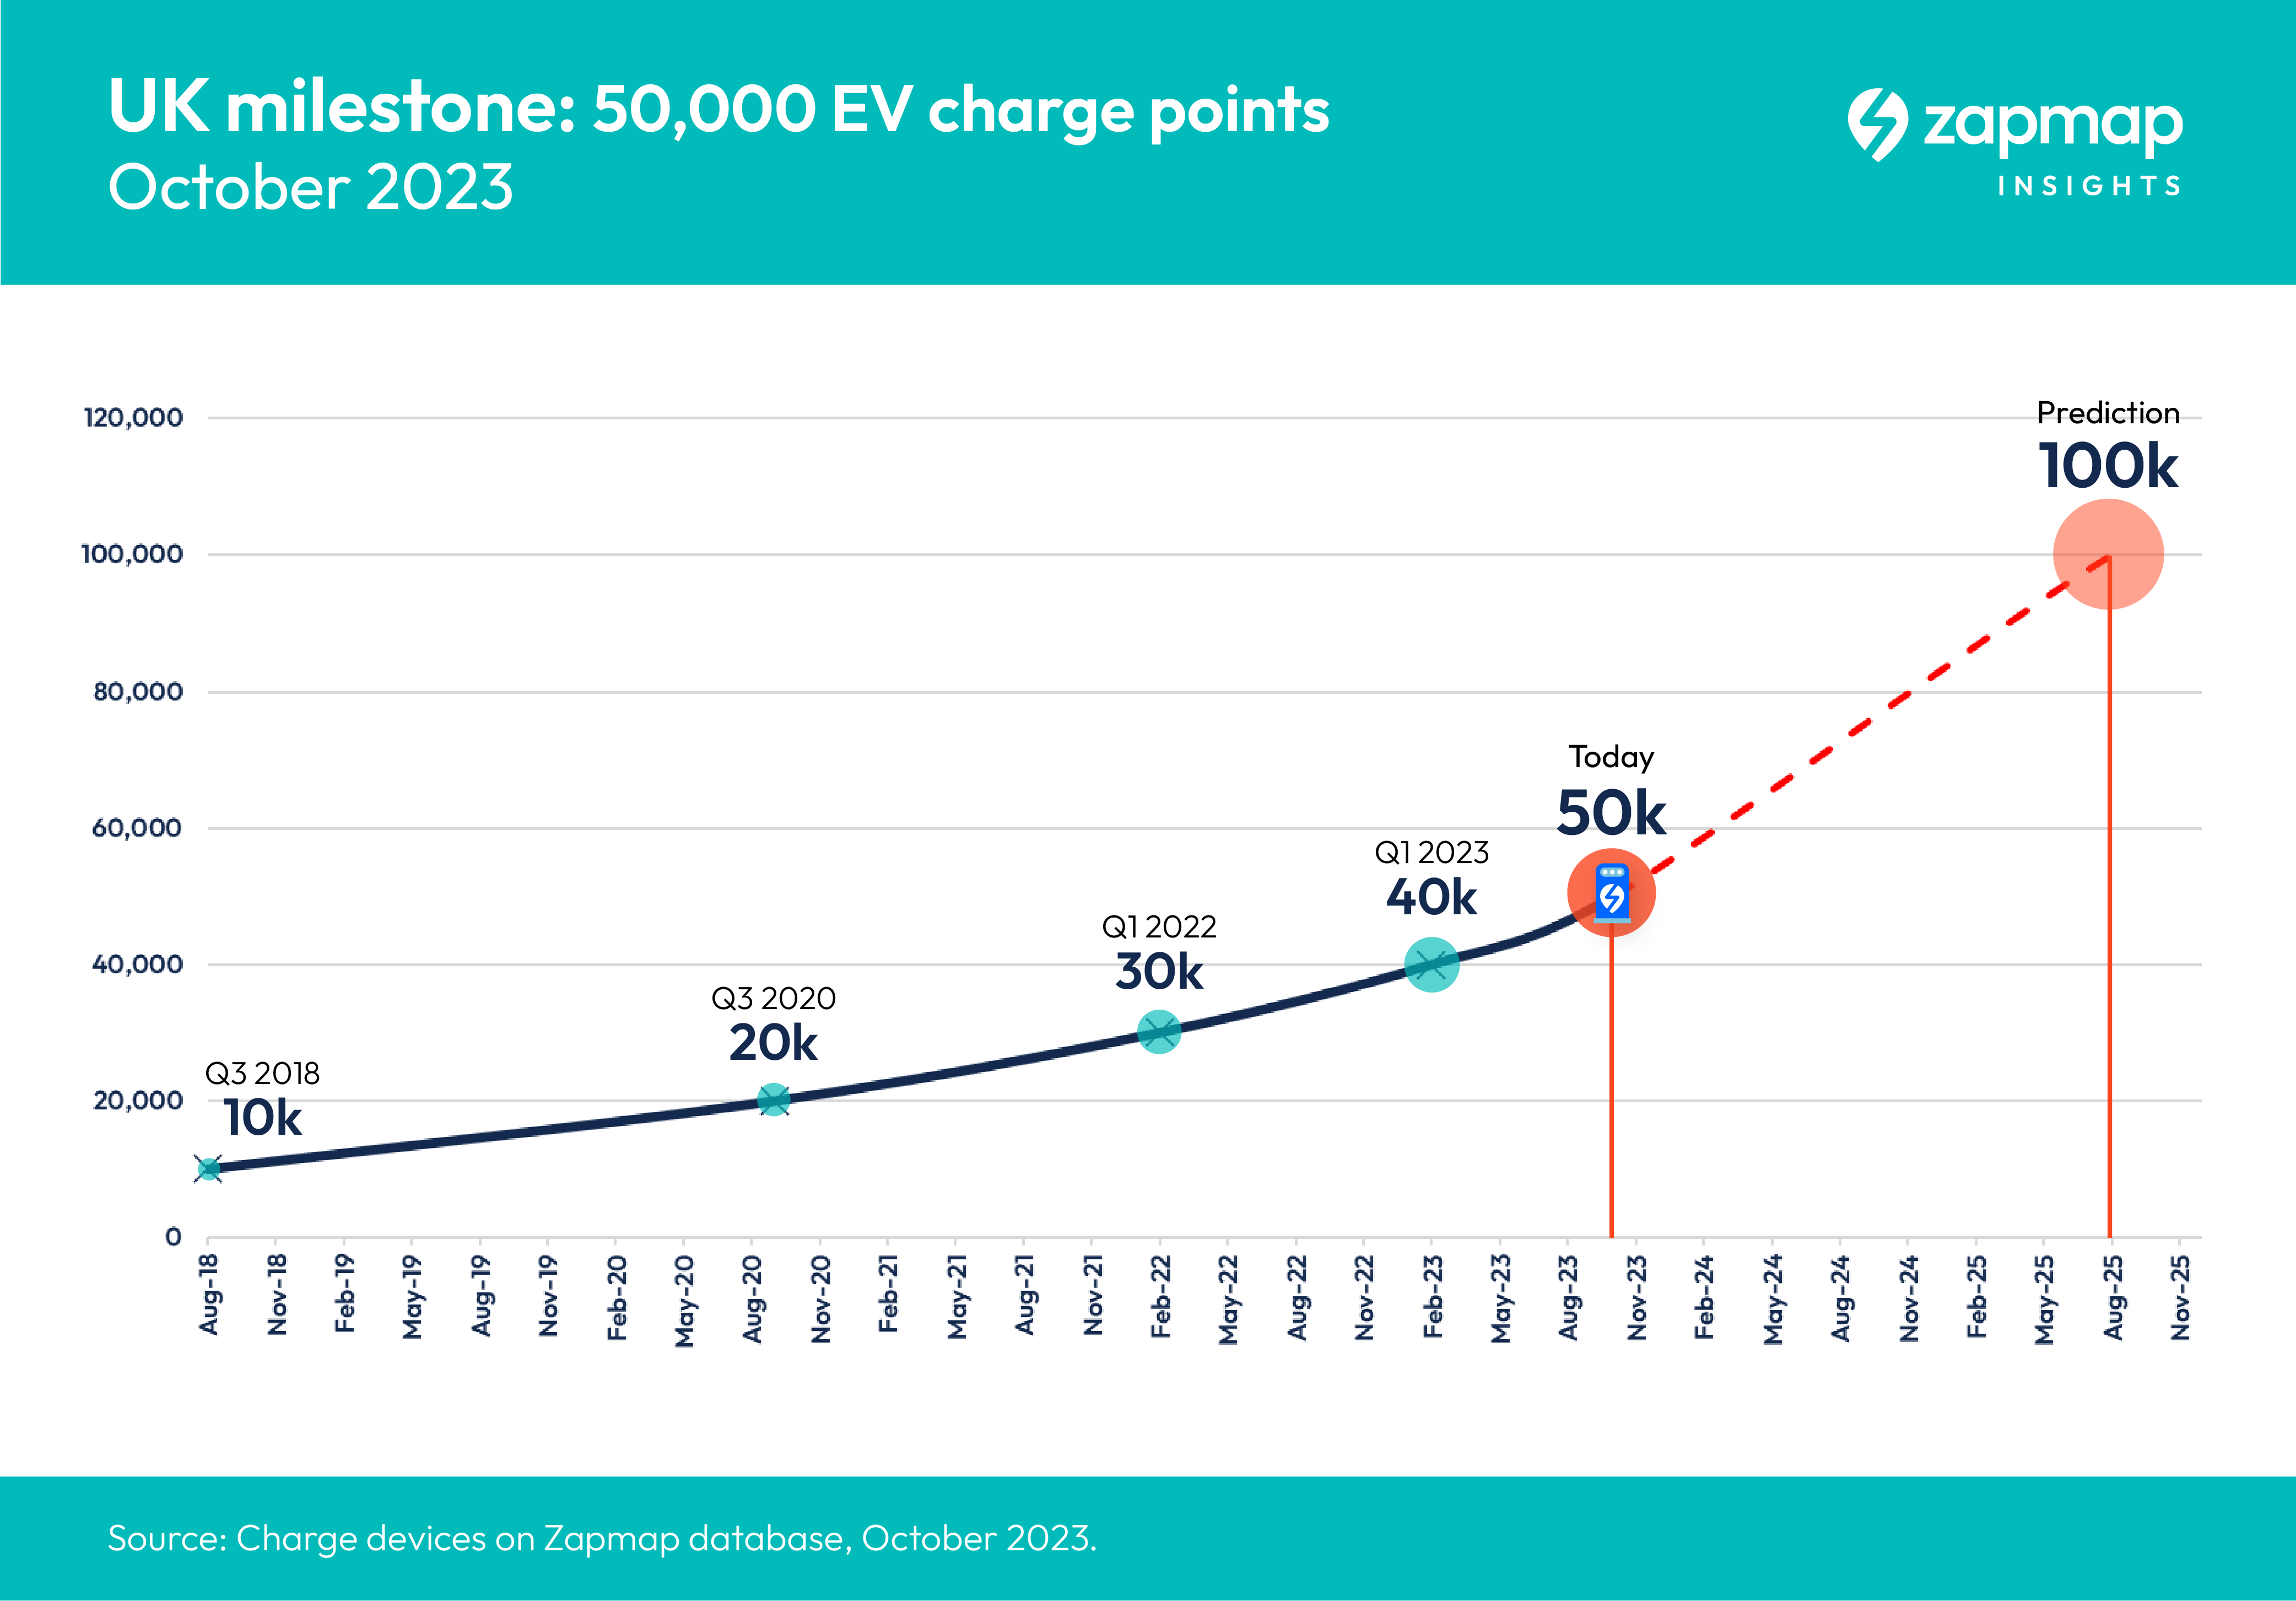 50,000 charge points in the UK